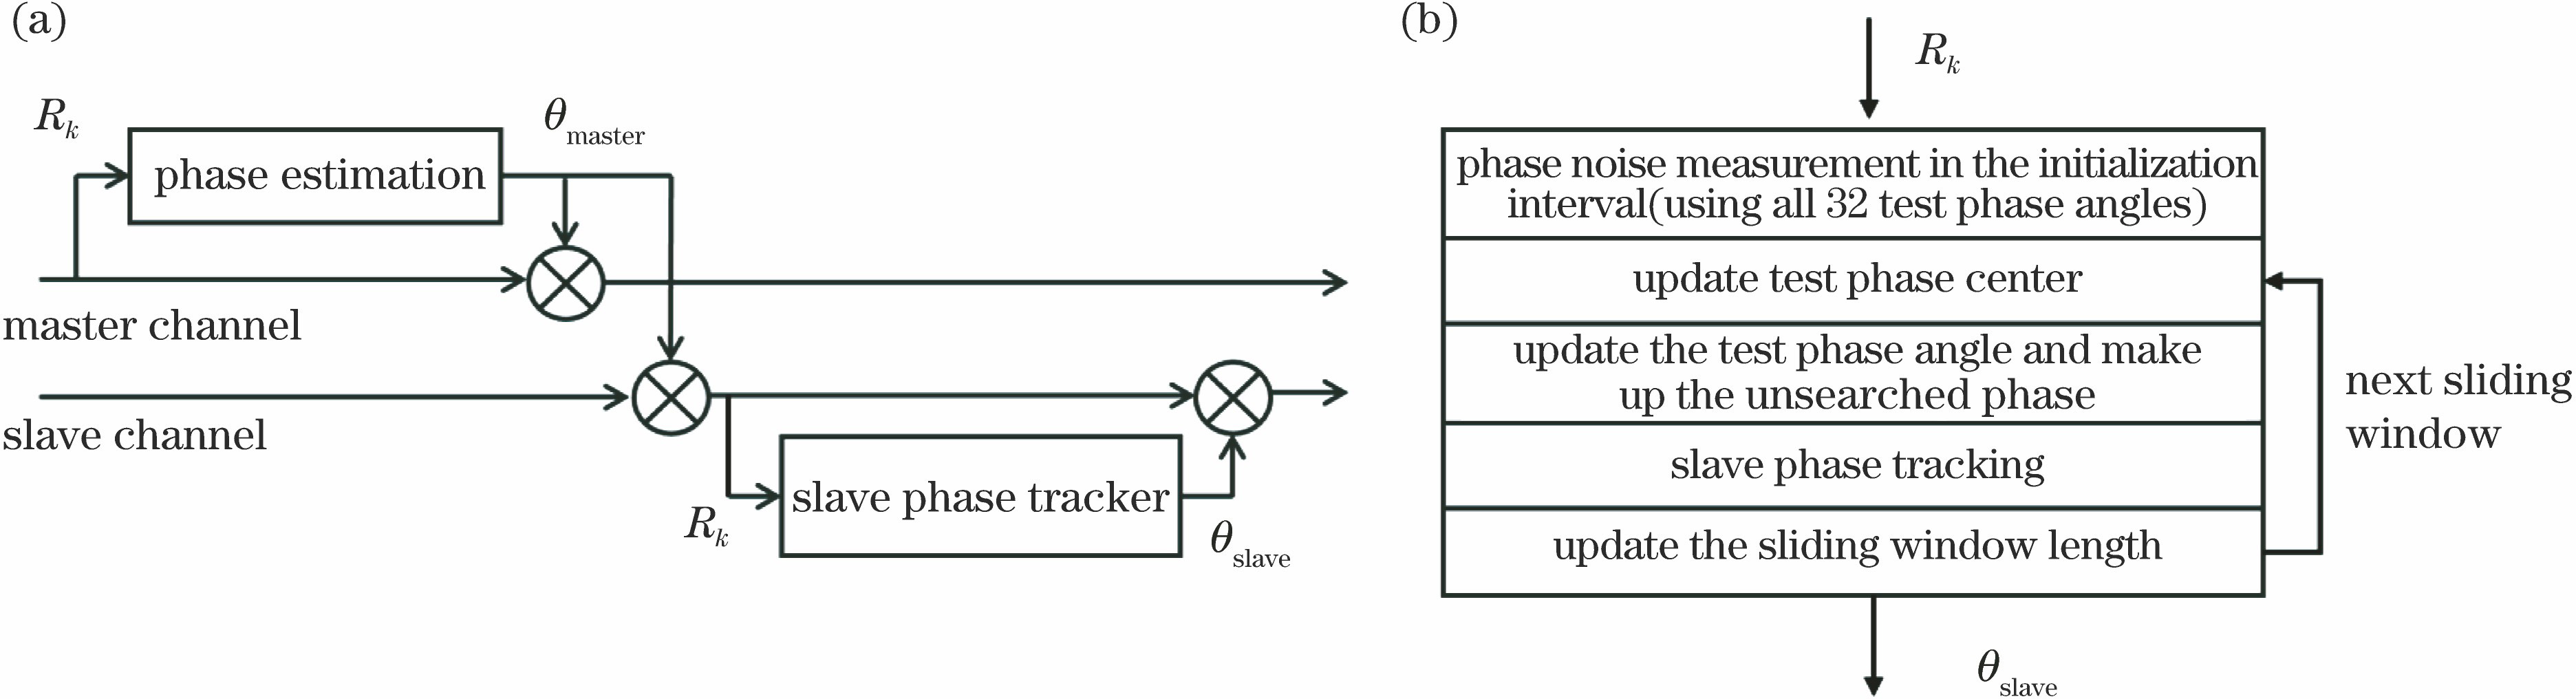 Structure diagrams of MS-CCPR and slave phase tracker. (a) Structure diagram of MS-CCPR; (b) structure diagram of slave phase tracker